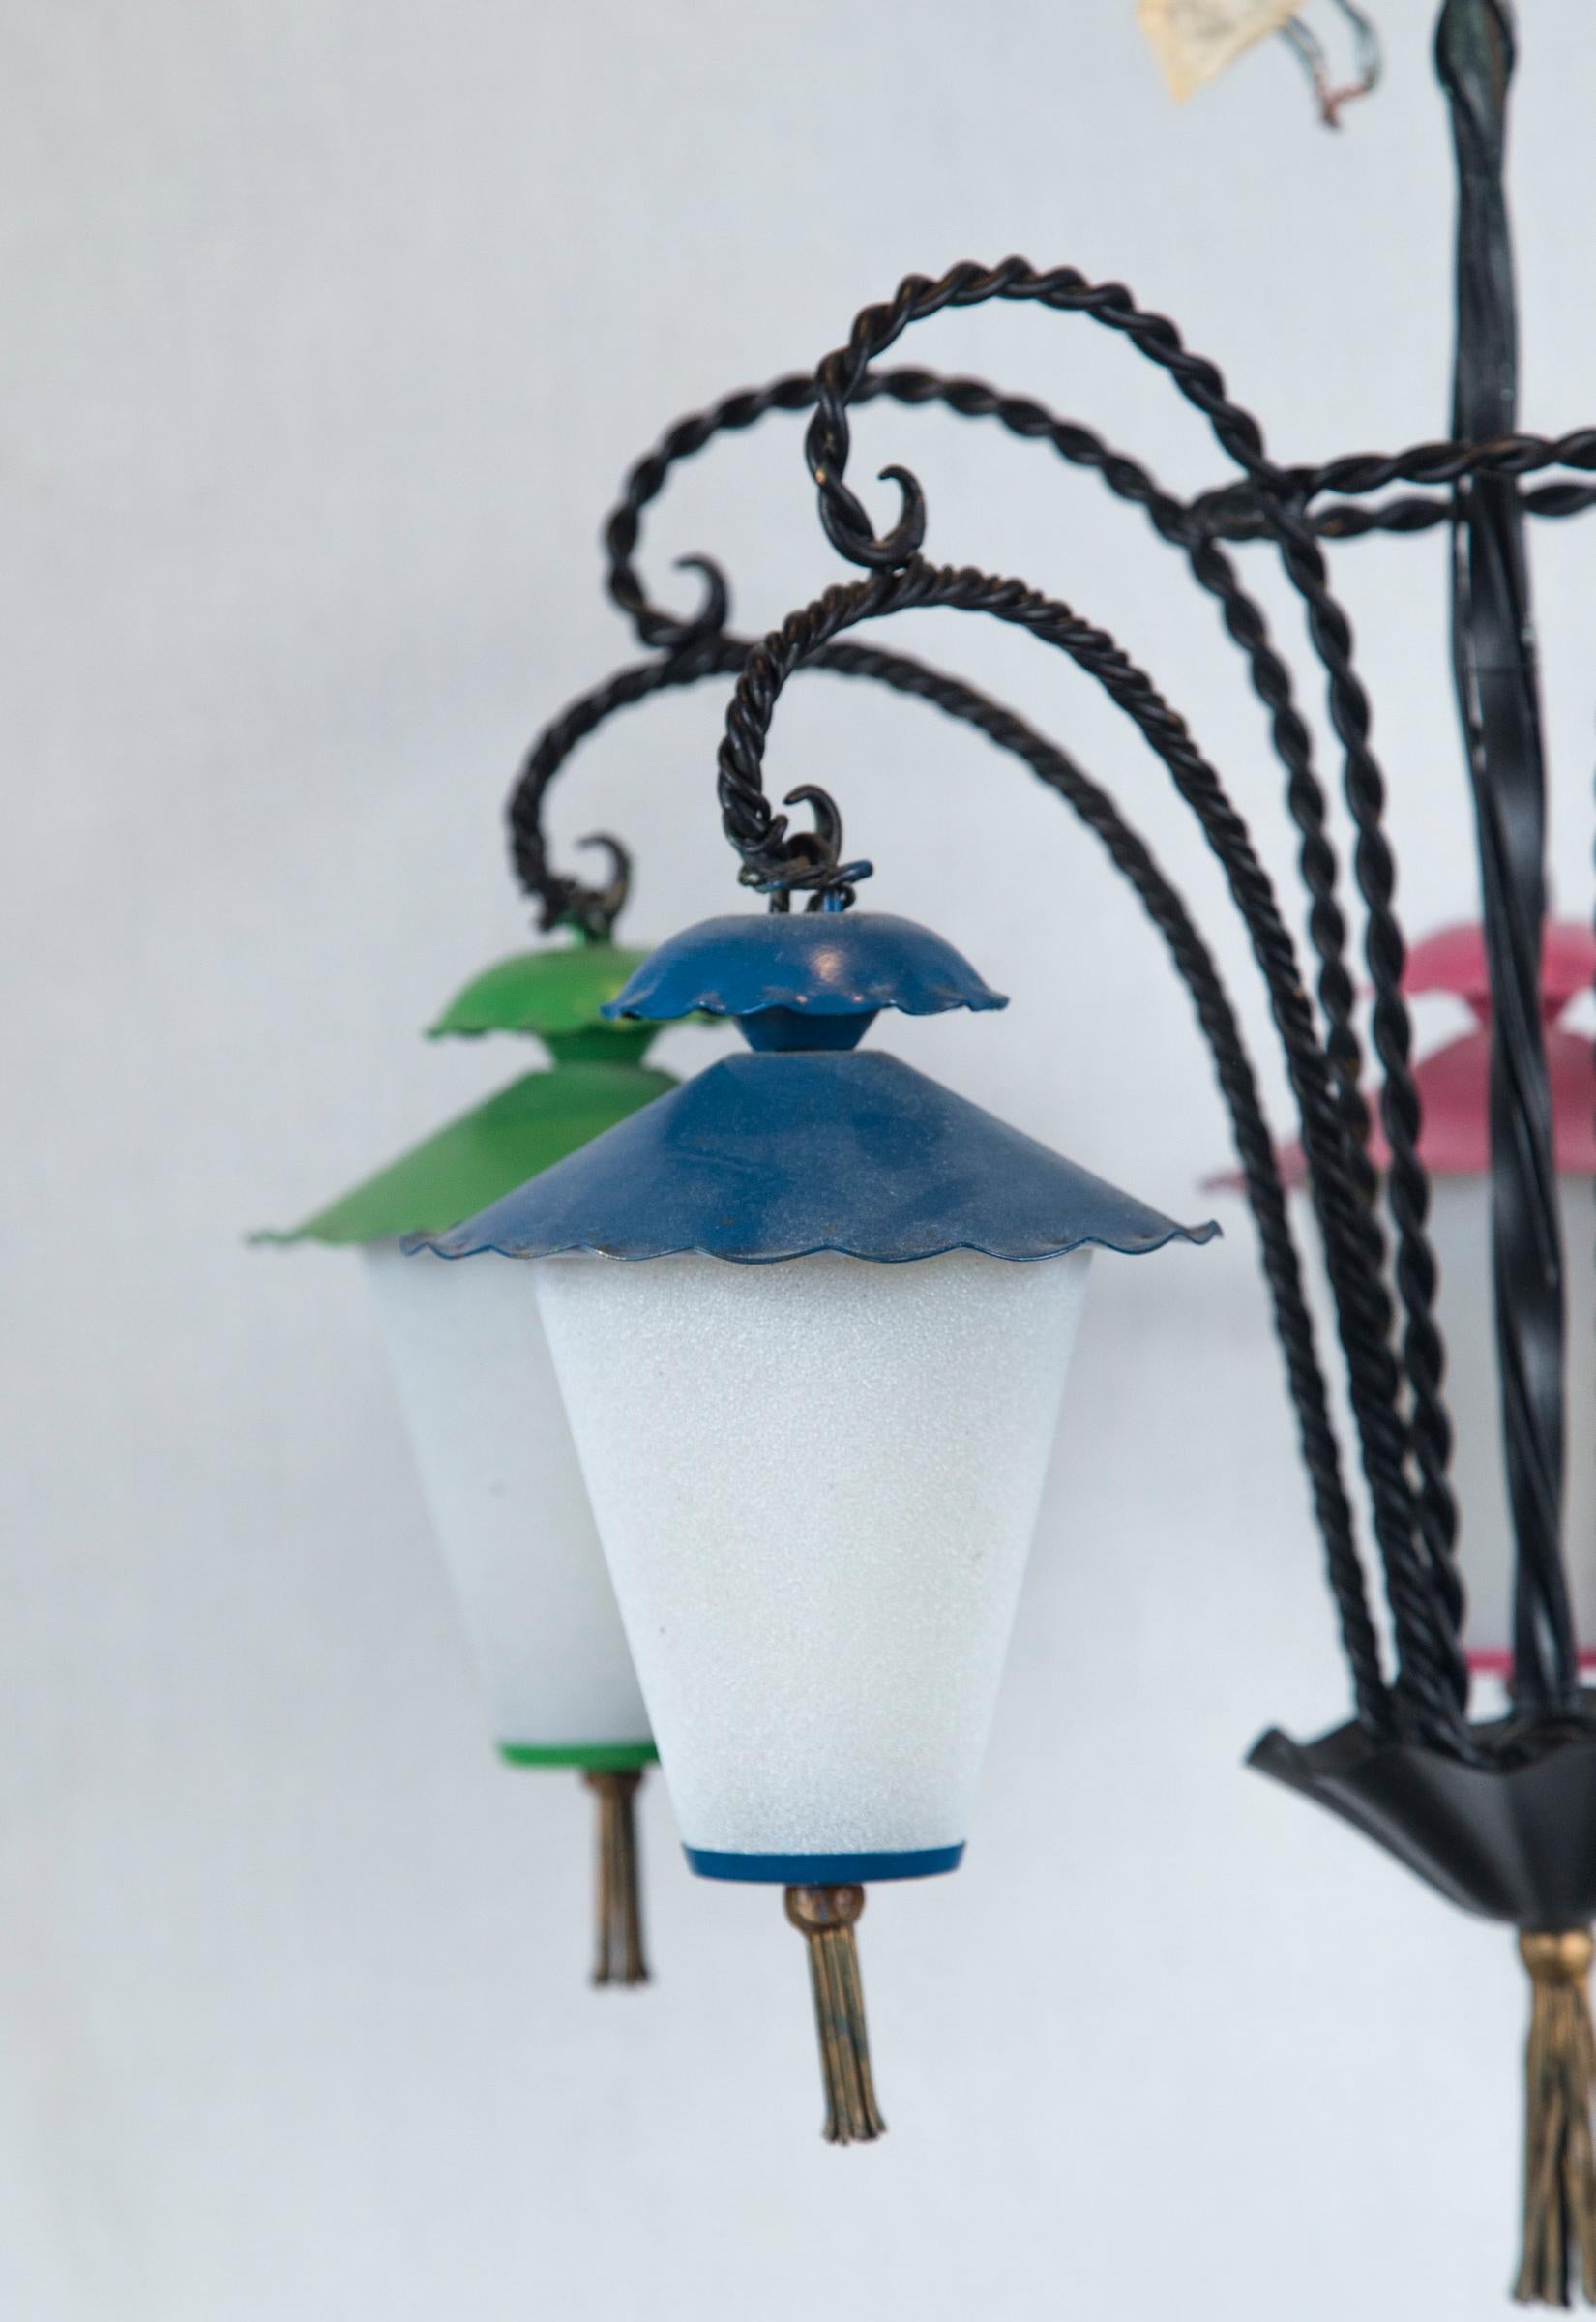 Wrought iron chandelier with five hanging Japanese style lanterns. Lanterns are milk glass with metal tops and metal bottoms embellished with brass tassels. Each lantern is painted a different color.